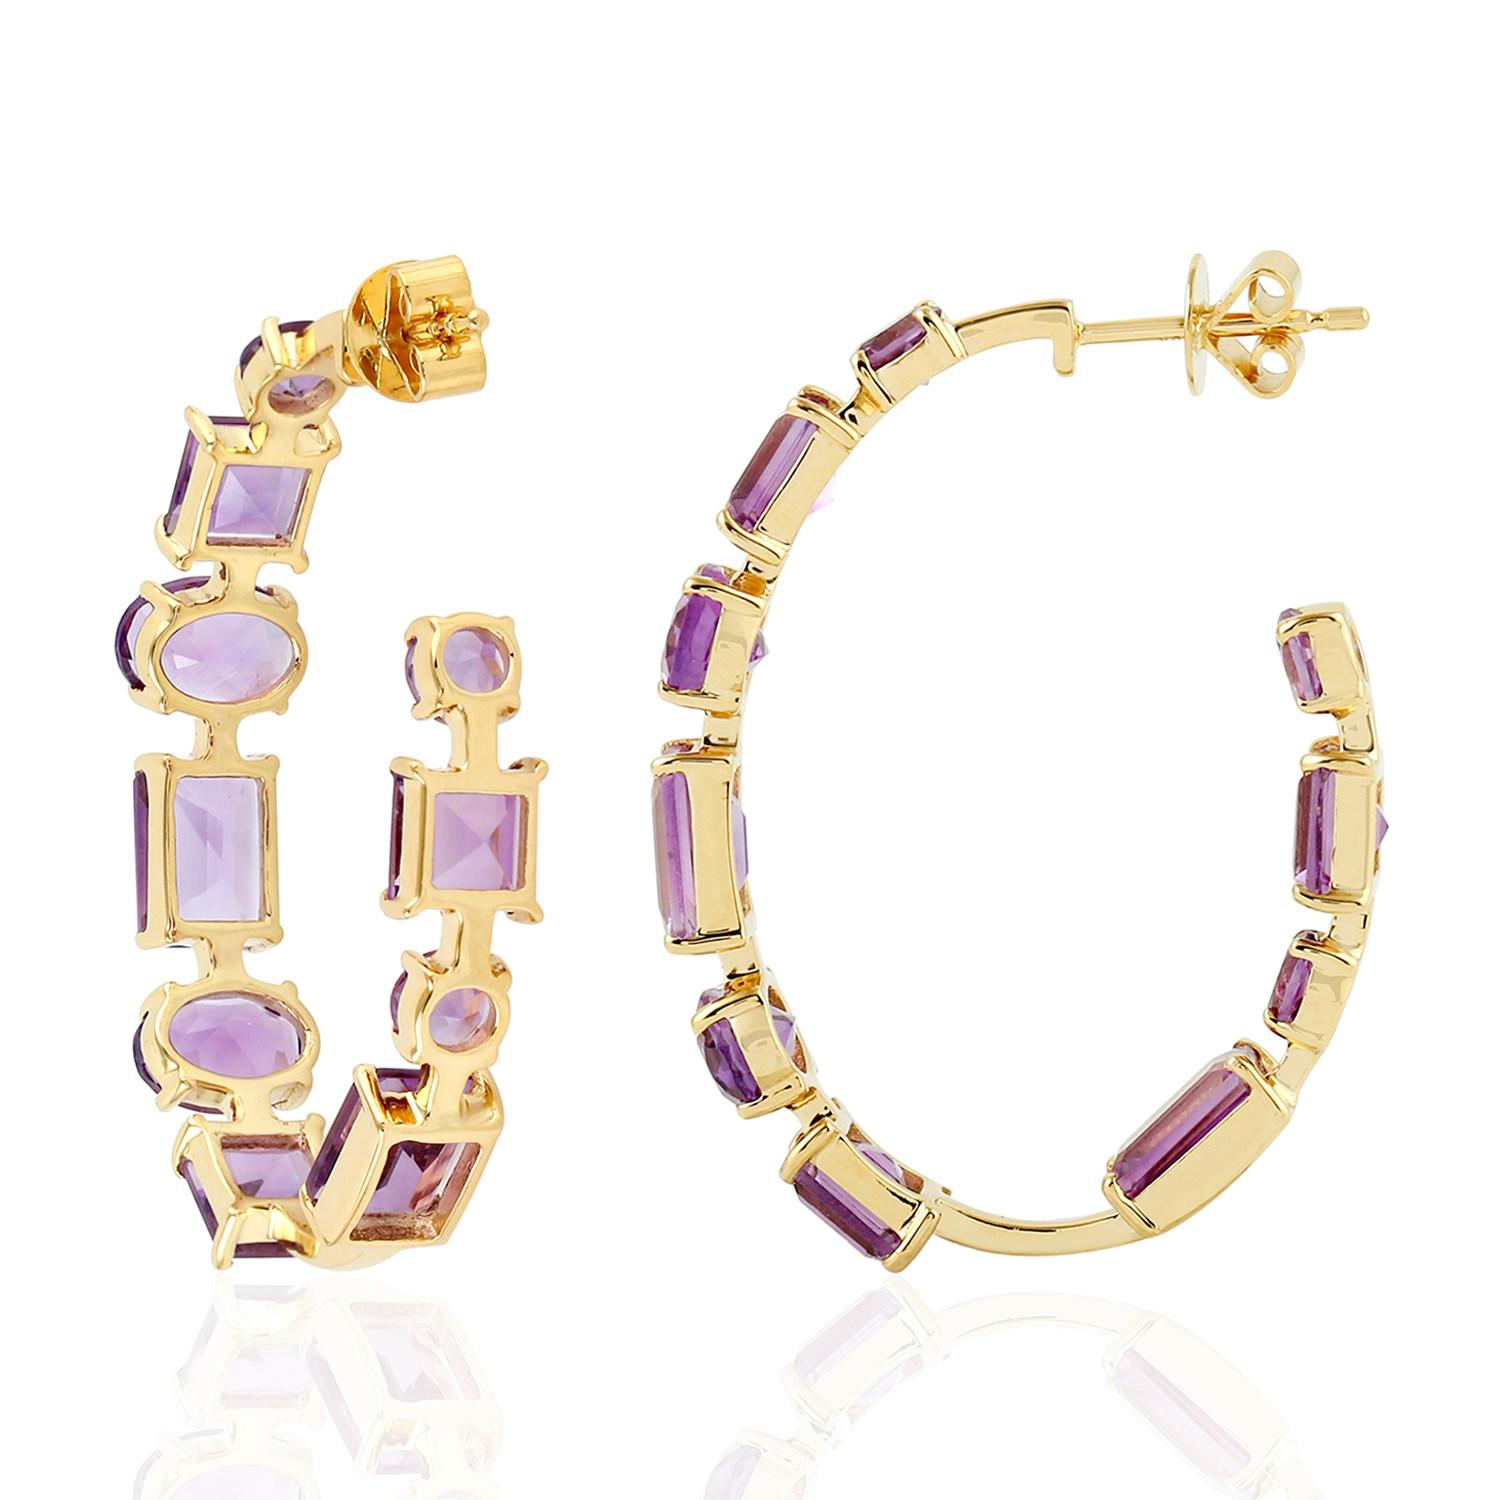 Handcrafted from 18-karat gold, these beautiful hoop earrings are studded with 11.79 carats of amethyst.

FOLLOW  MEGHNA JEWELS storefront to view the latest collection & exclusive pieces.  Meghna Jewels is proudly rated as a Top Seller on 1stdibs